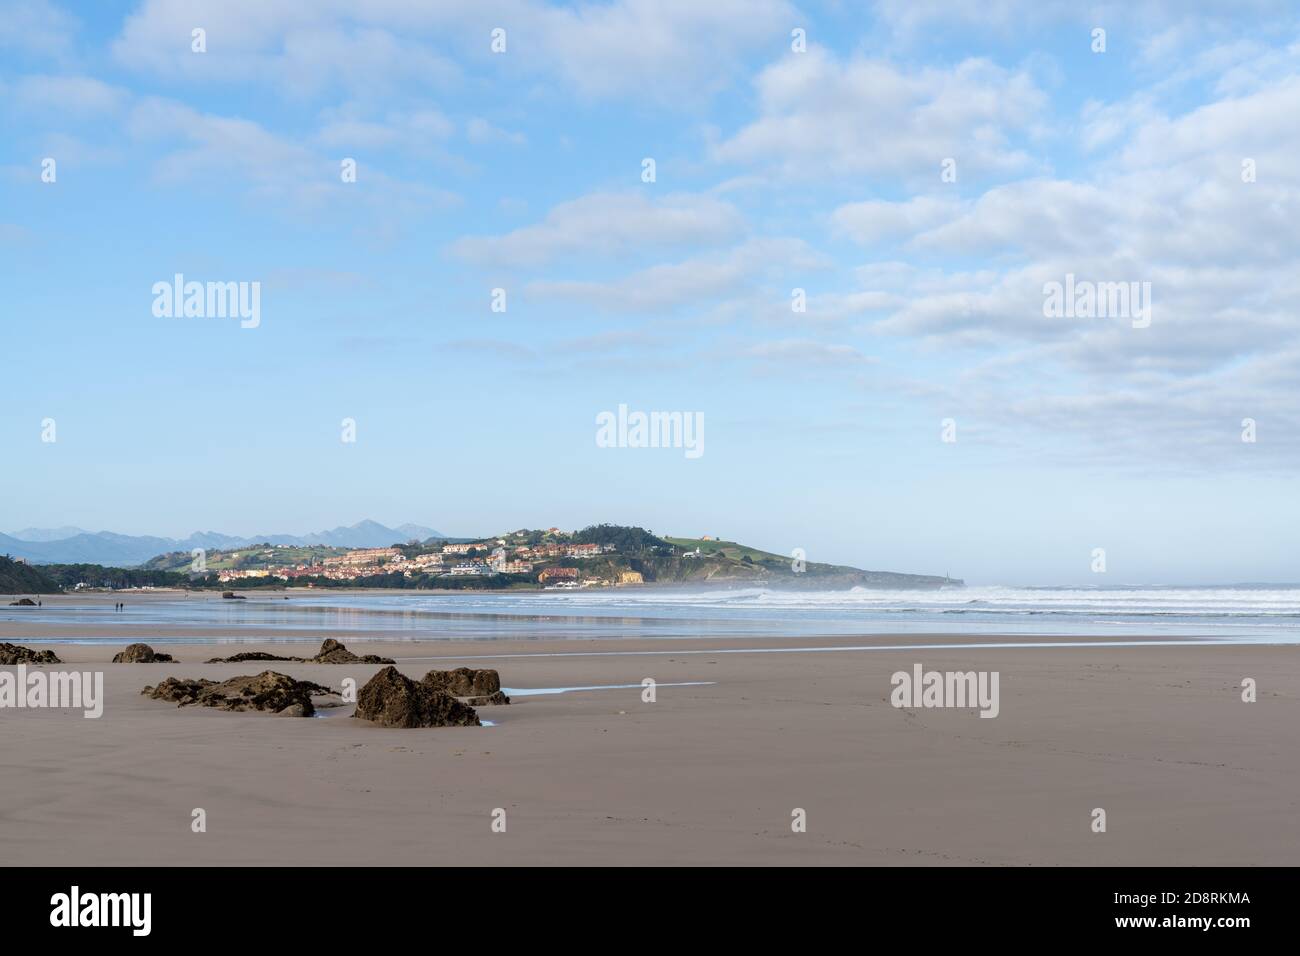 A wide and empty sandy beach on the coast of Cantabria in northern Spain Stock Photo